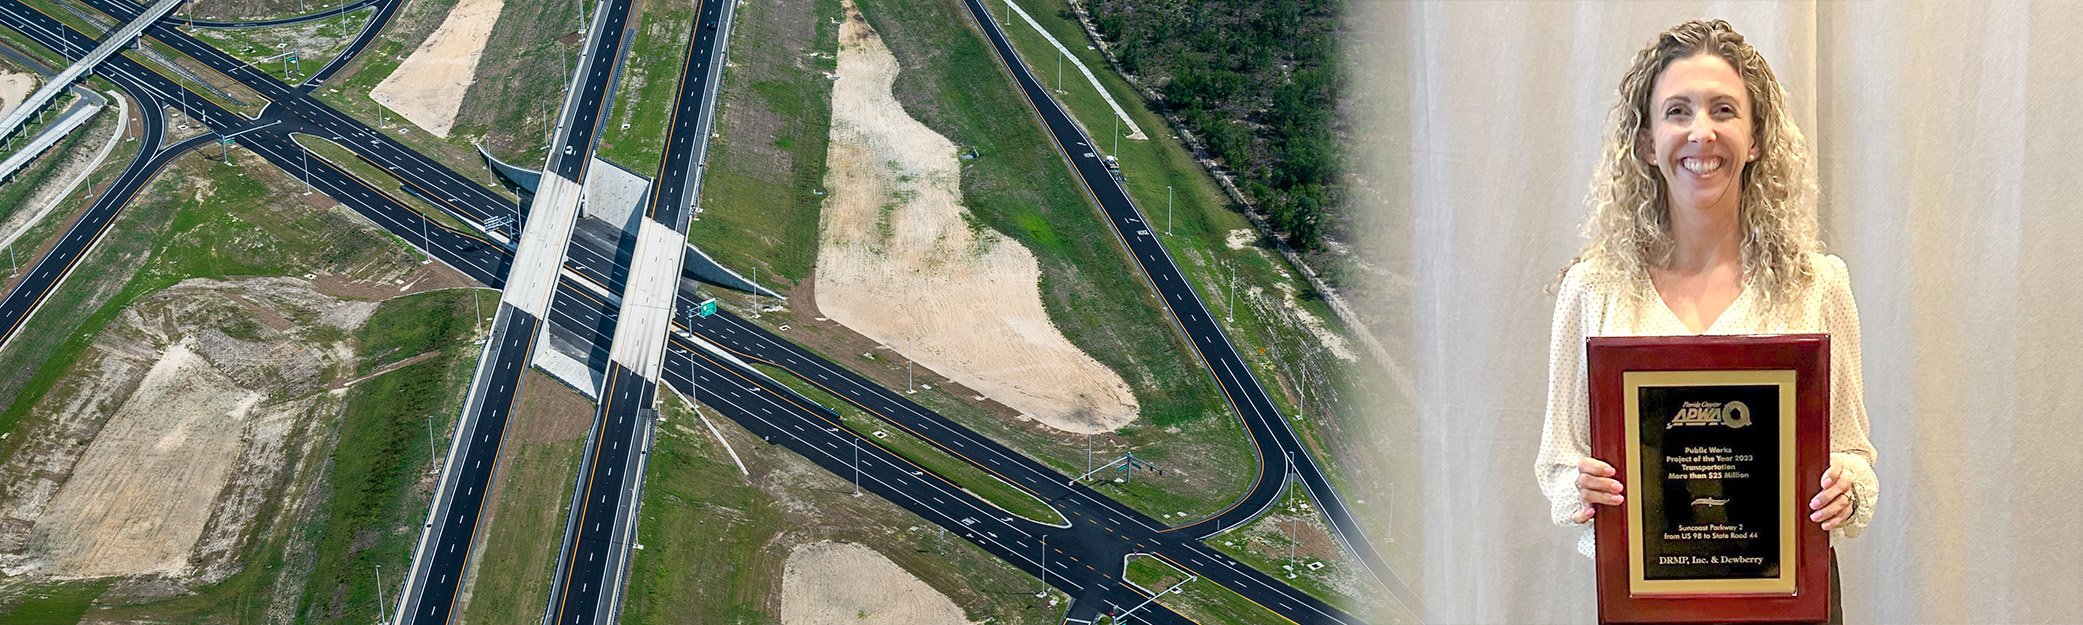 Suncoast Parkway 2 Project Named APWA Florida Transportation Project of the Year 